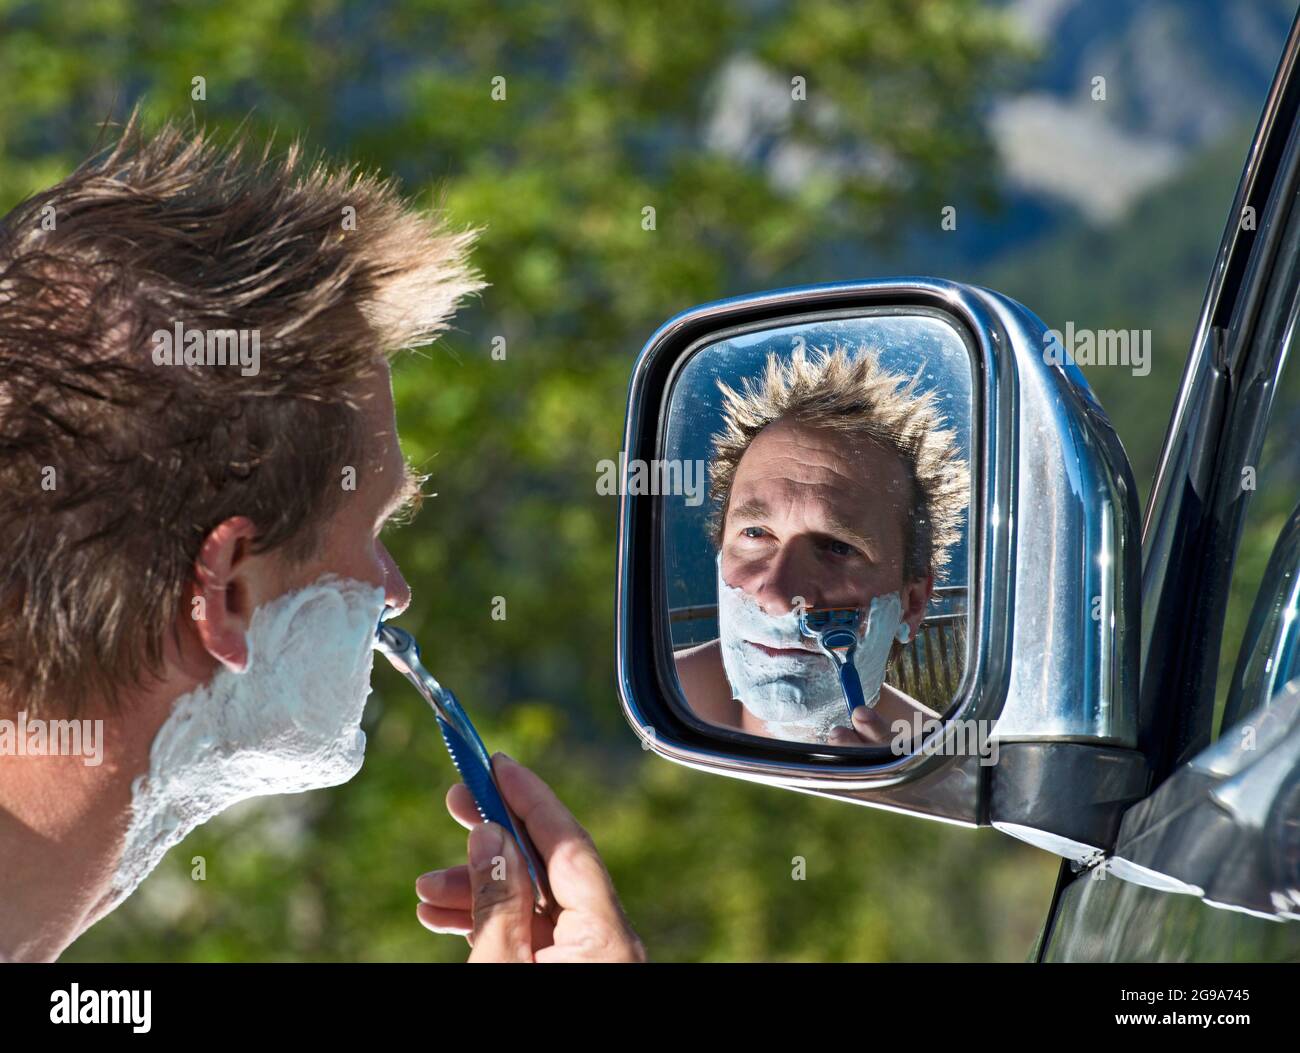 man shaving in the side mirror of his car on roadtrip Stock Photo